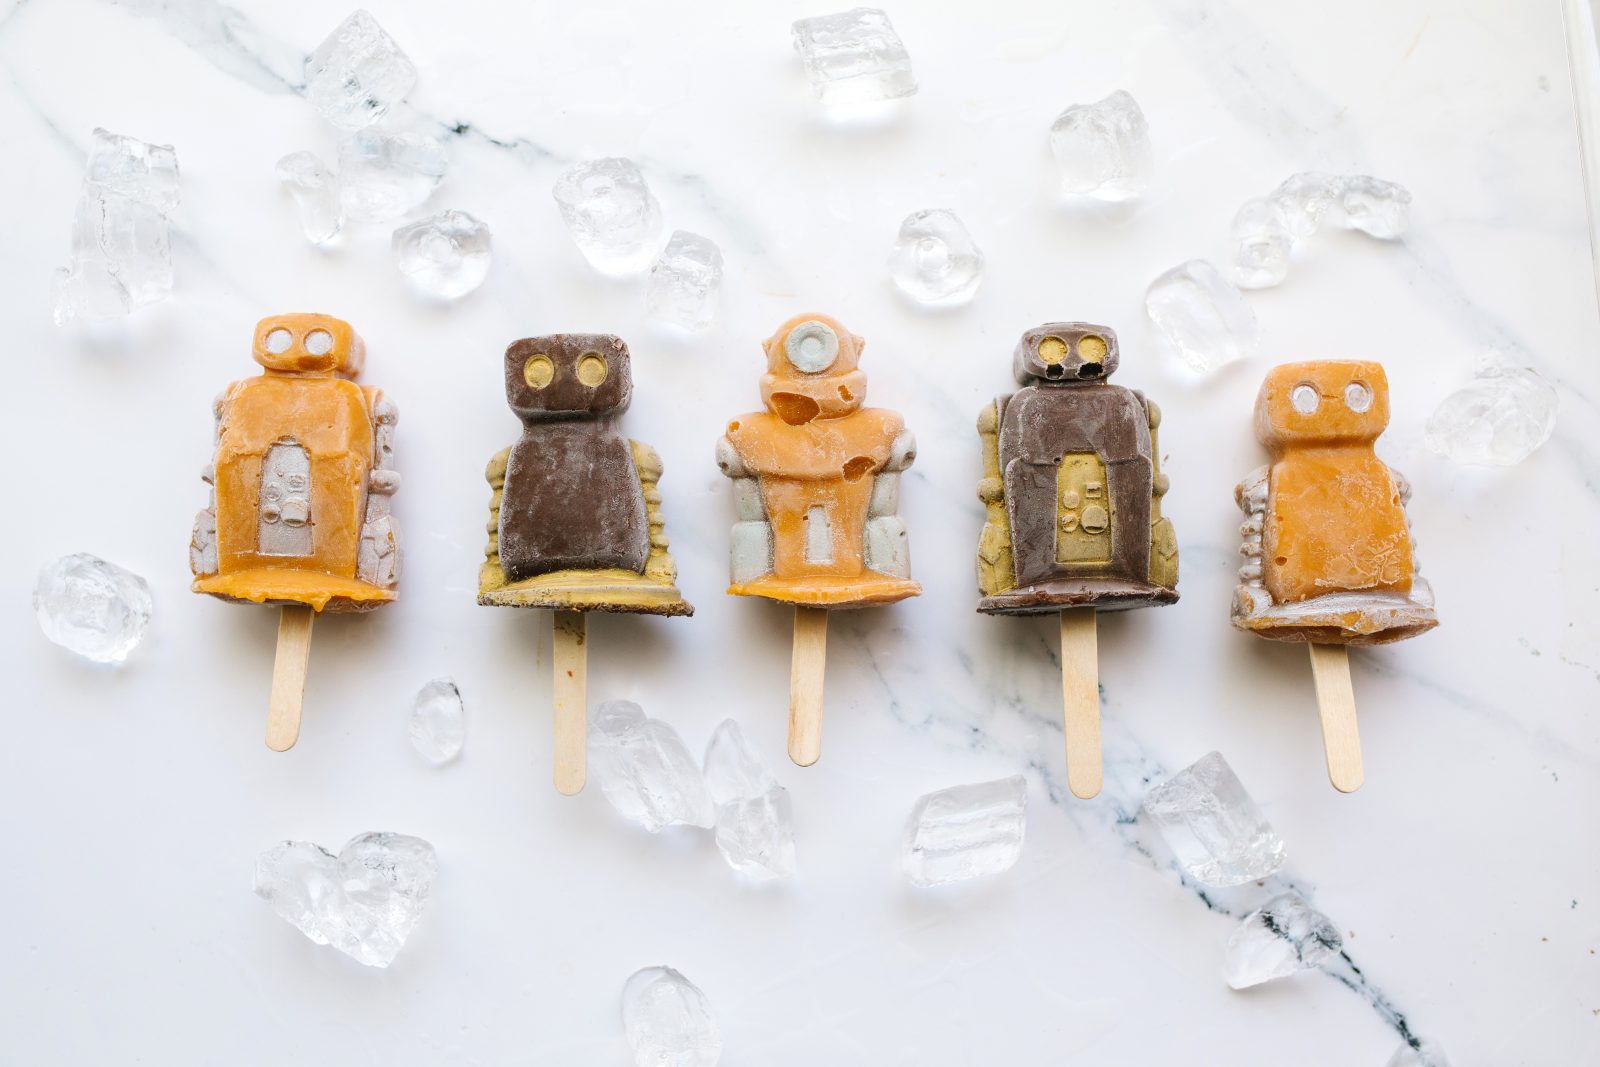 Summer Snacks: Metallic-Dusted Robot Pudding Pops Recipe + a tutorial featured by Top US Craft Blog + The Pretty Life Girls